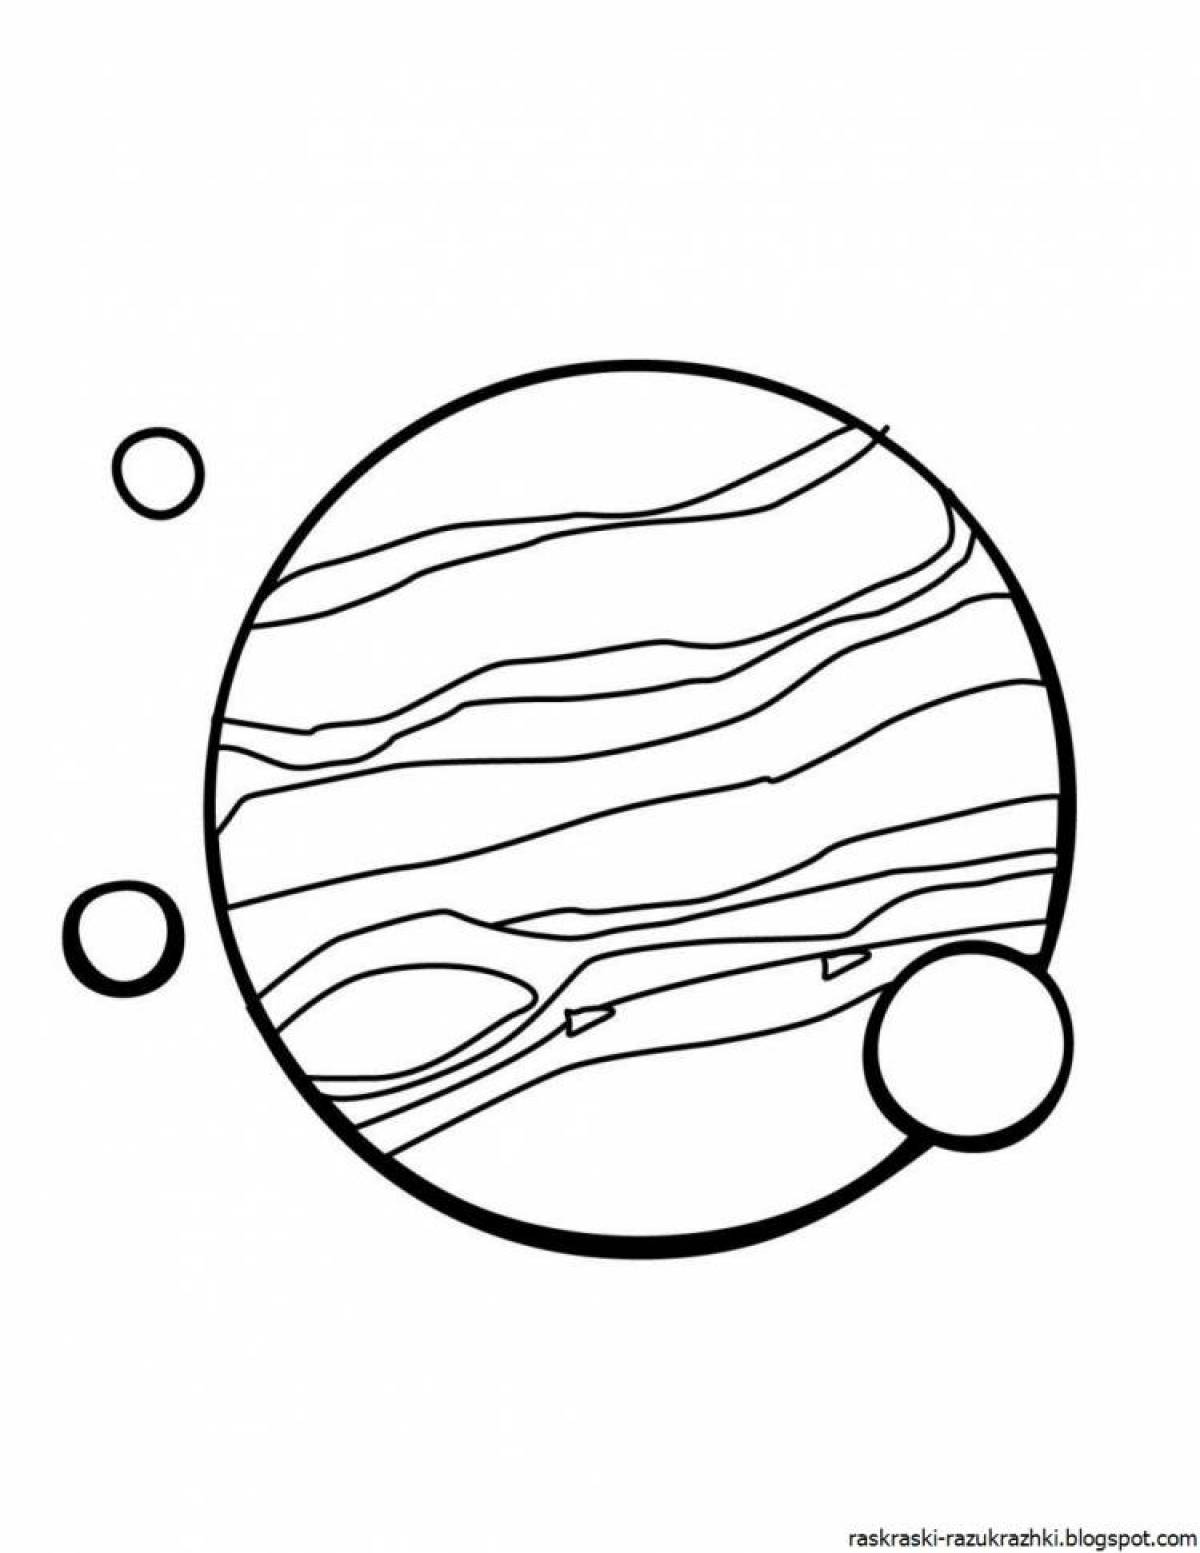 Planets of the solar system for kids #1